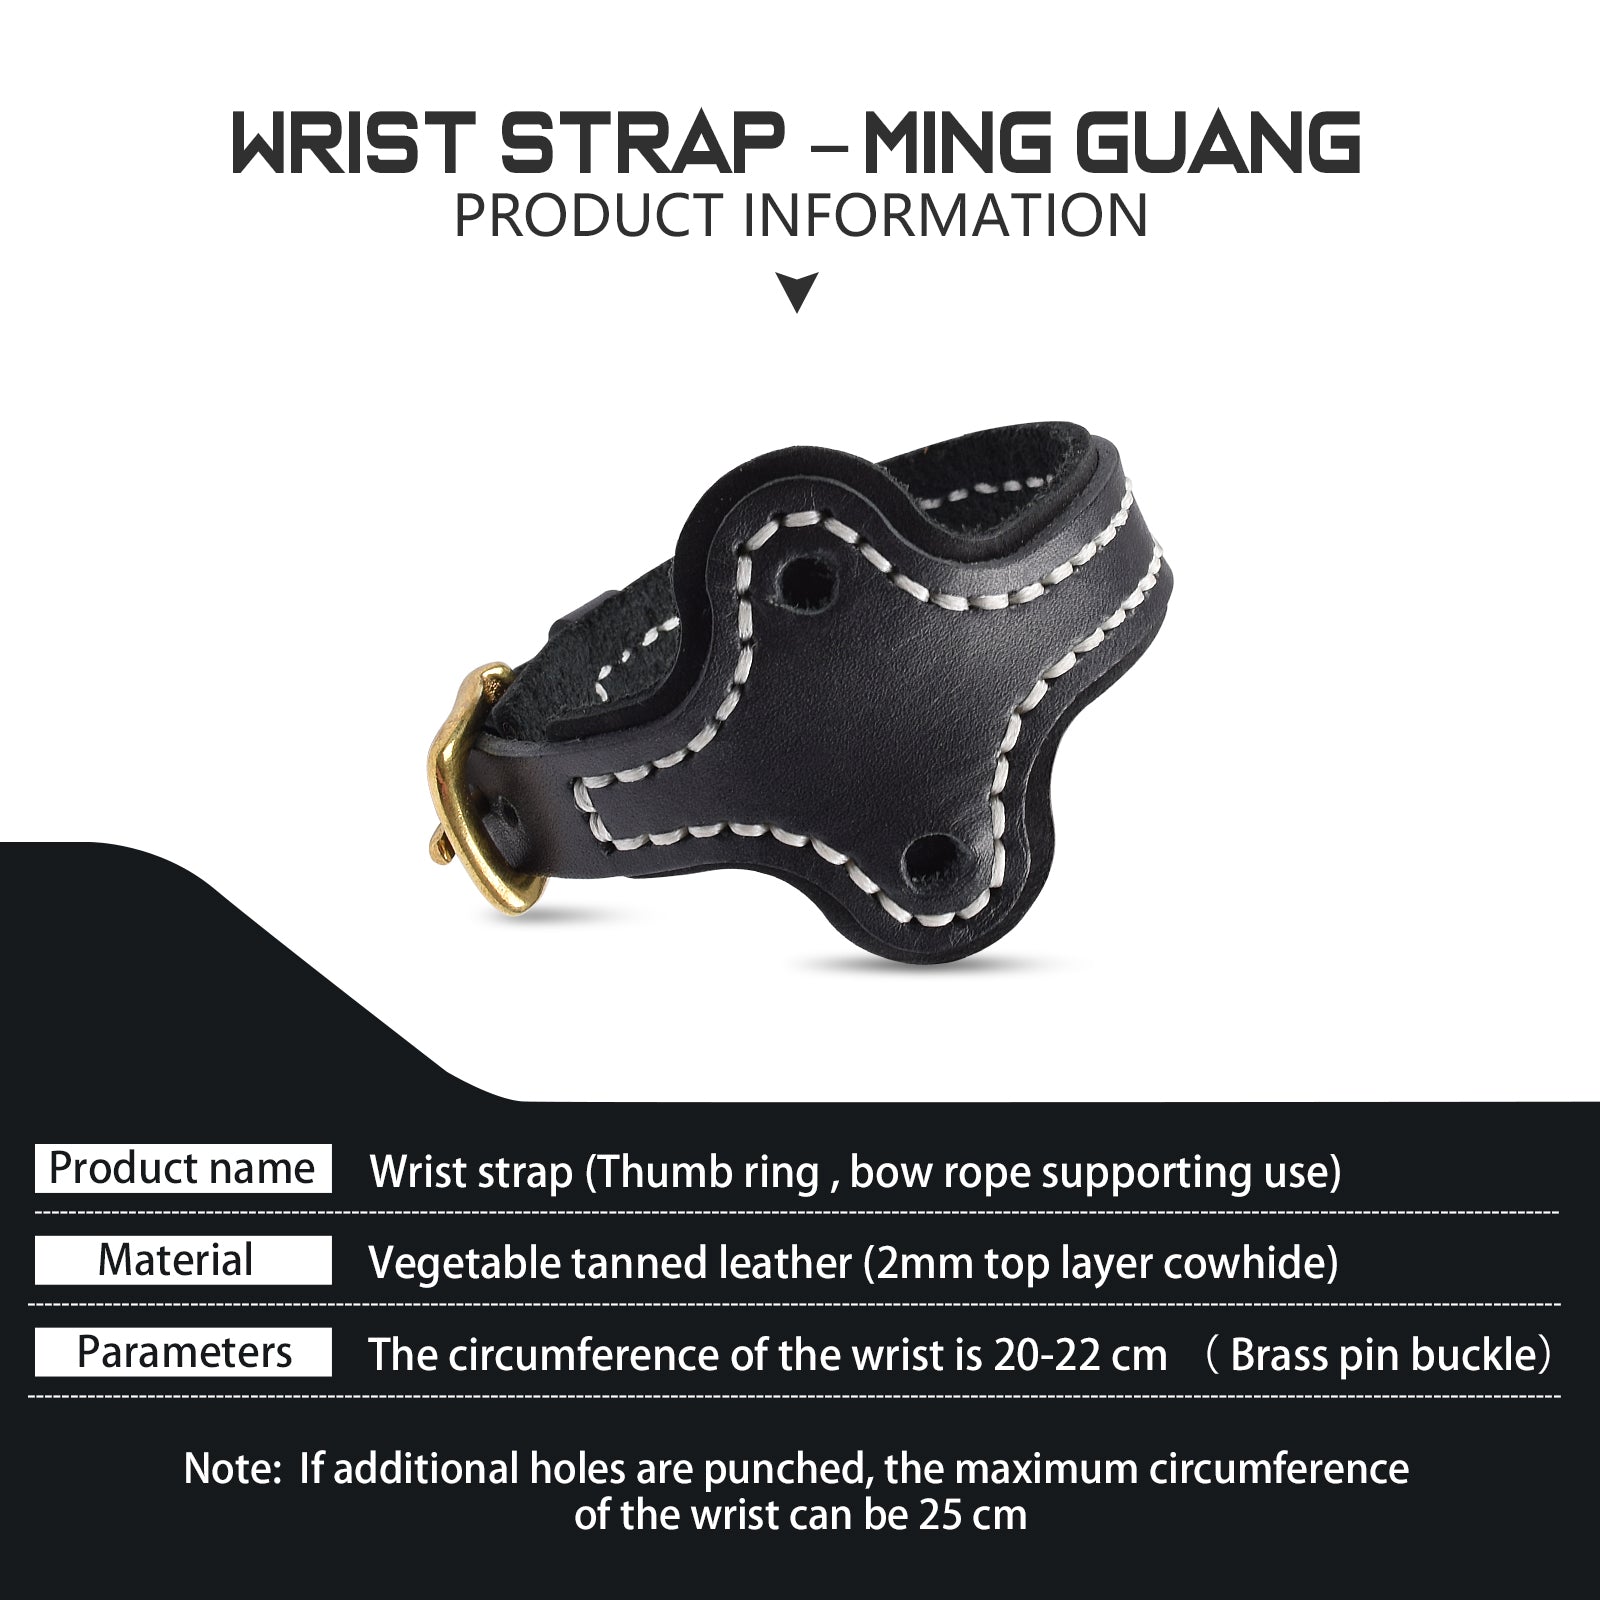 NEW Soft Leather & Brass Thumb Armor Ming Guang Archery Thumb Ring And Wrist Strap Archery Finger Protector